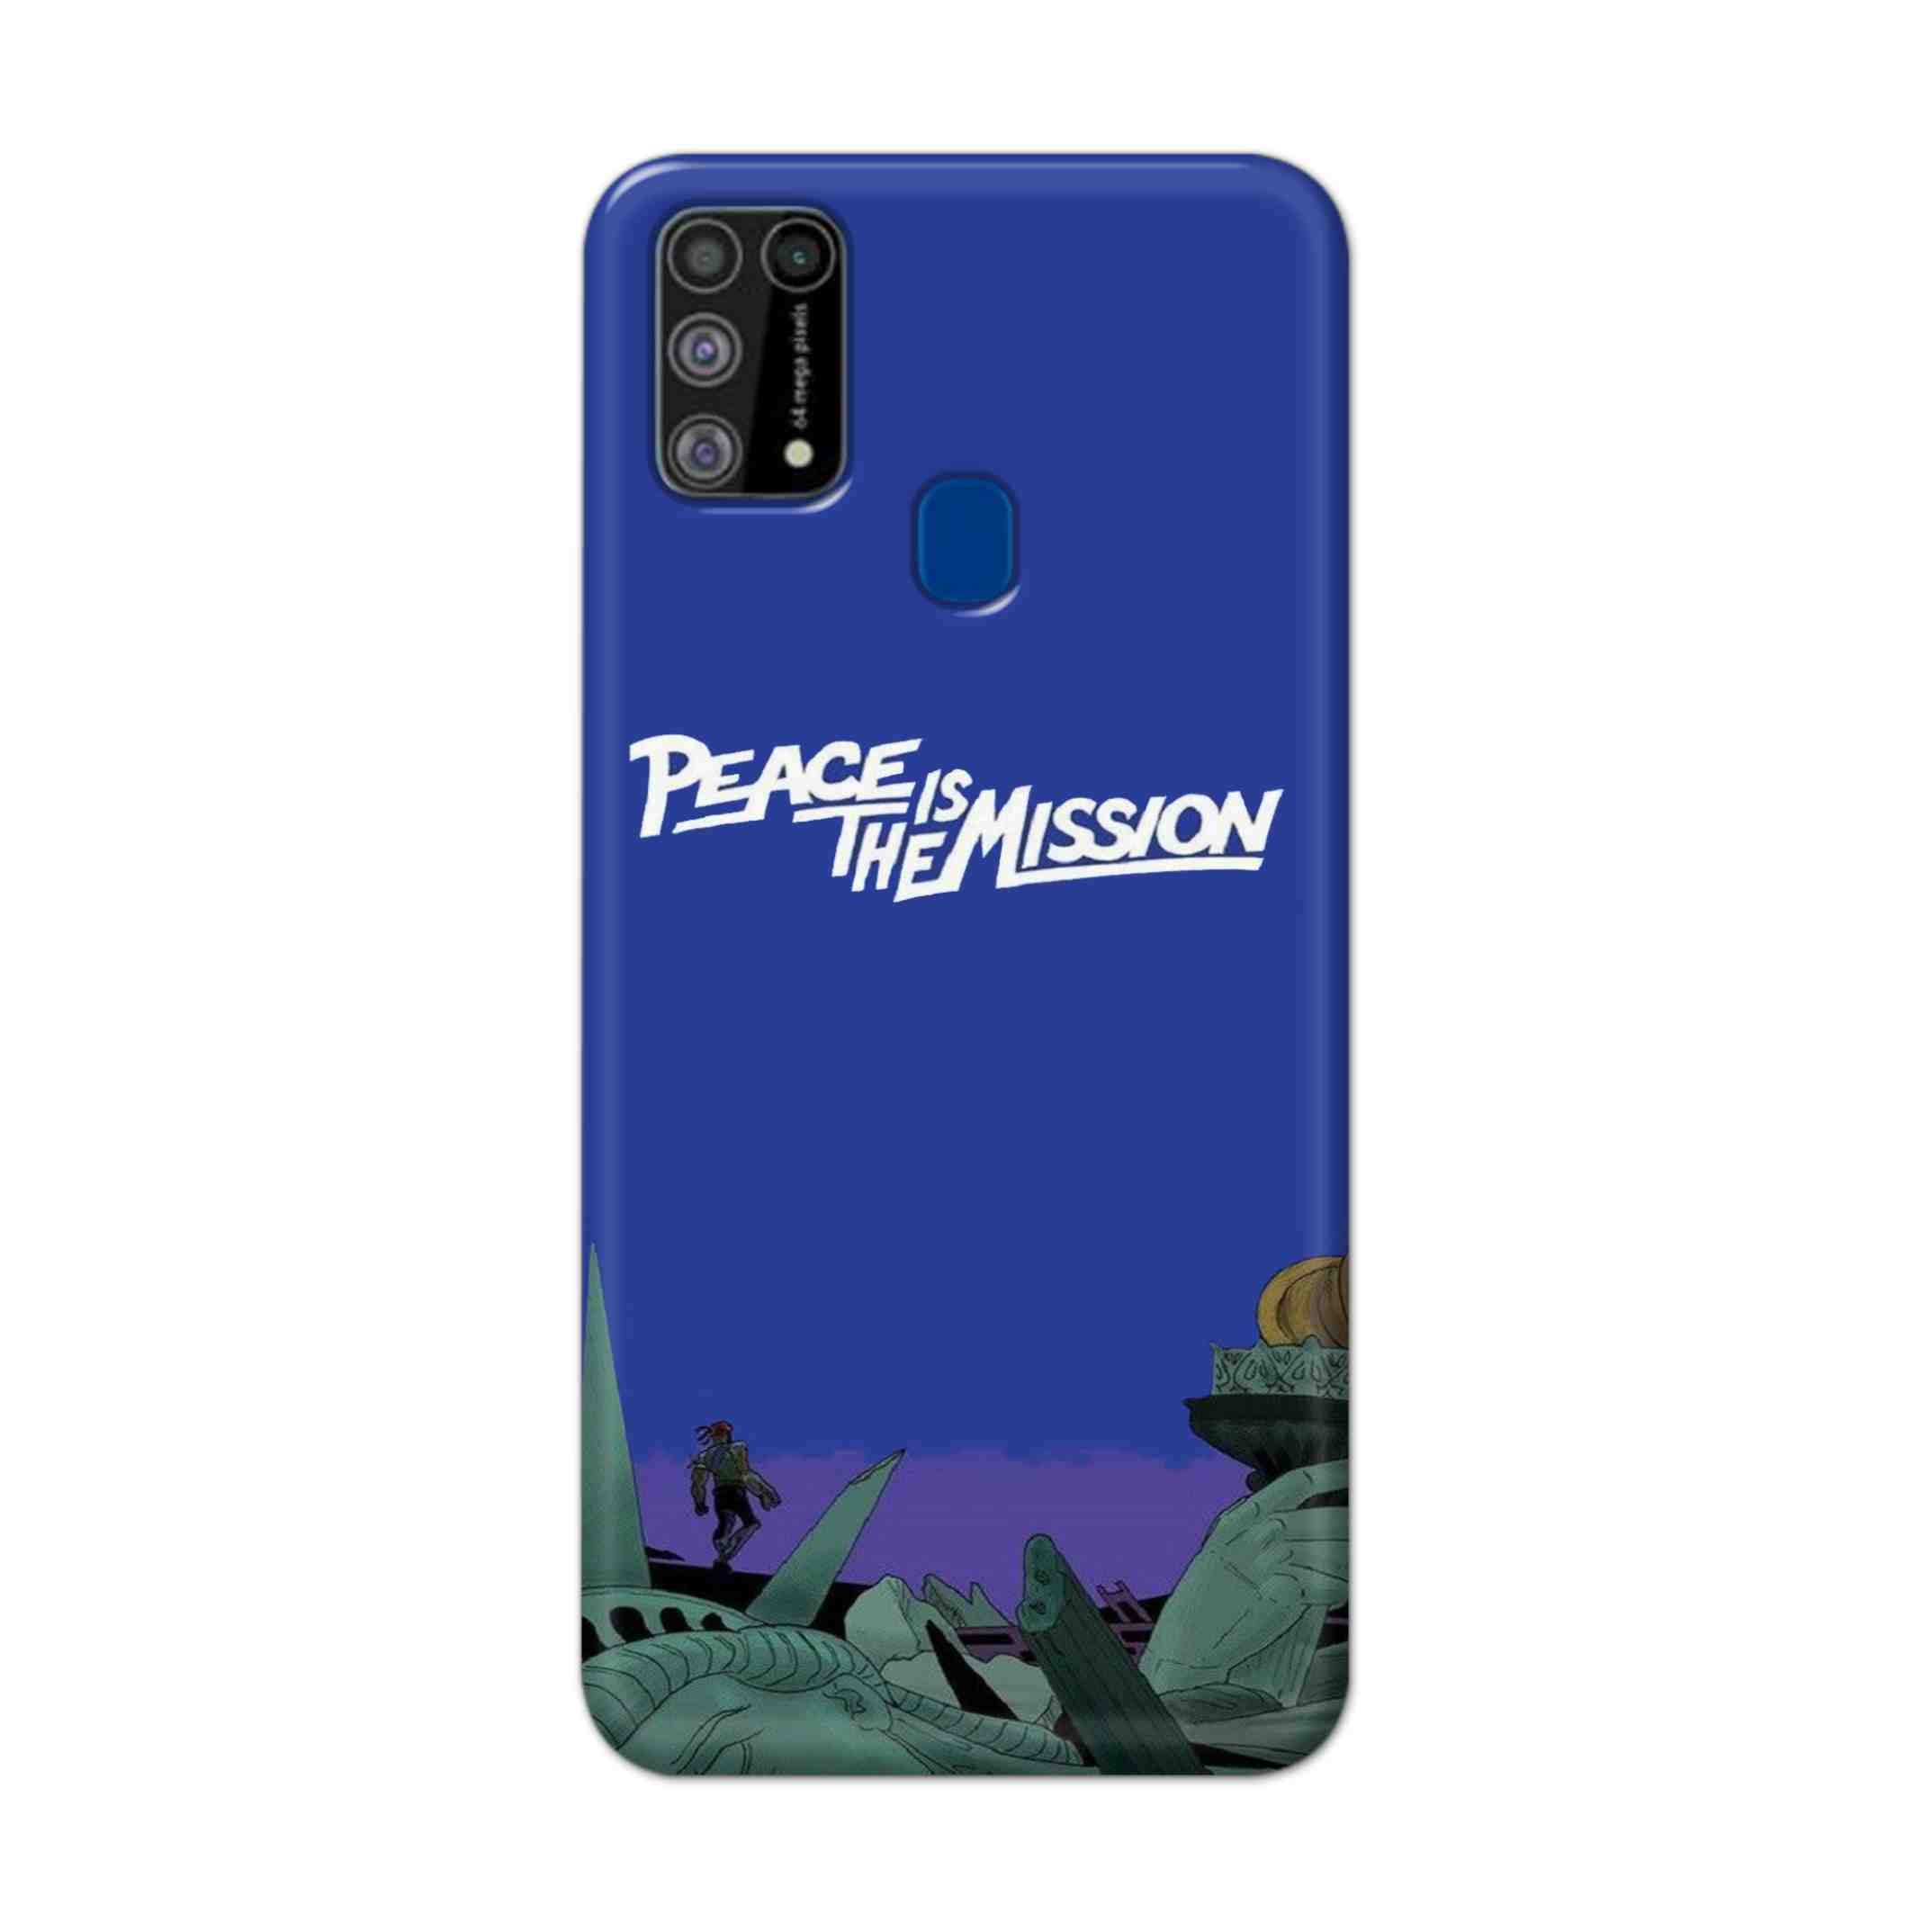 Buy Peace Is The Misson Hard Back Mobile Phone Case Cover For Samsung Galaxy M31 Online